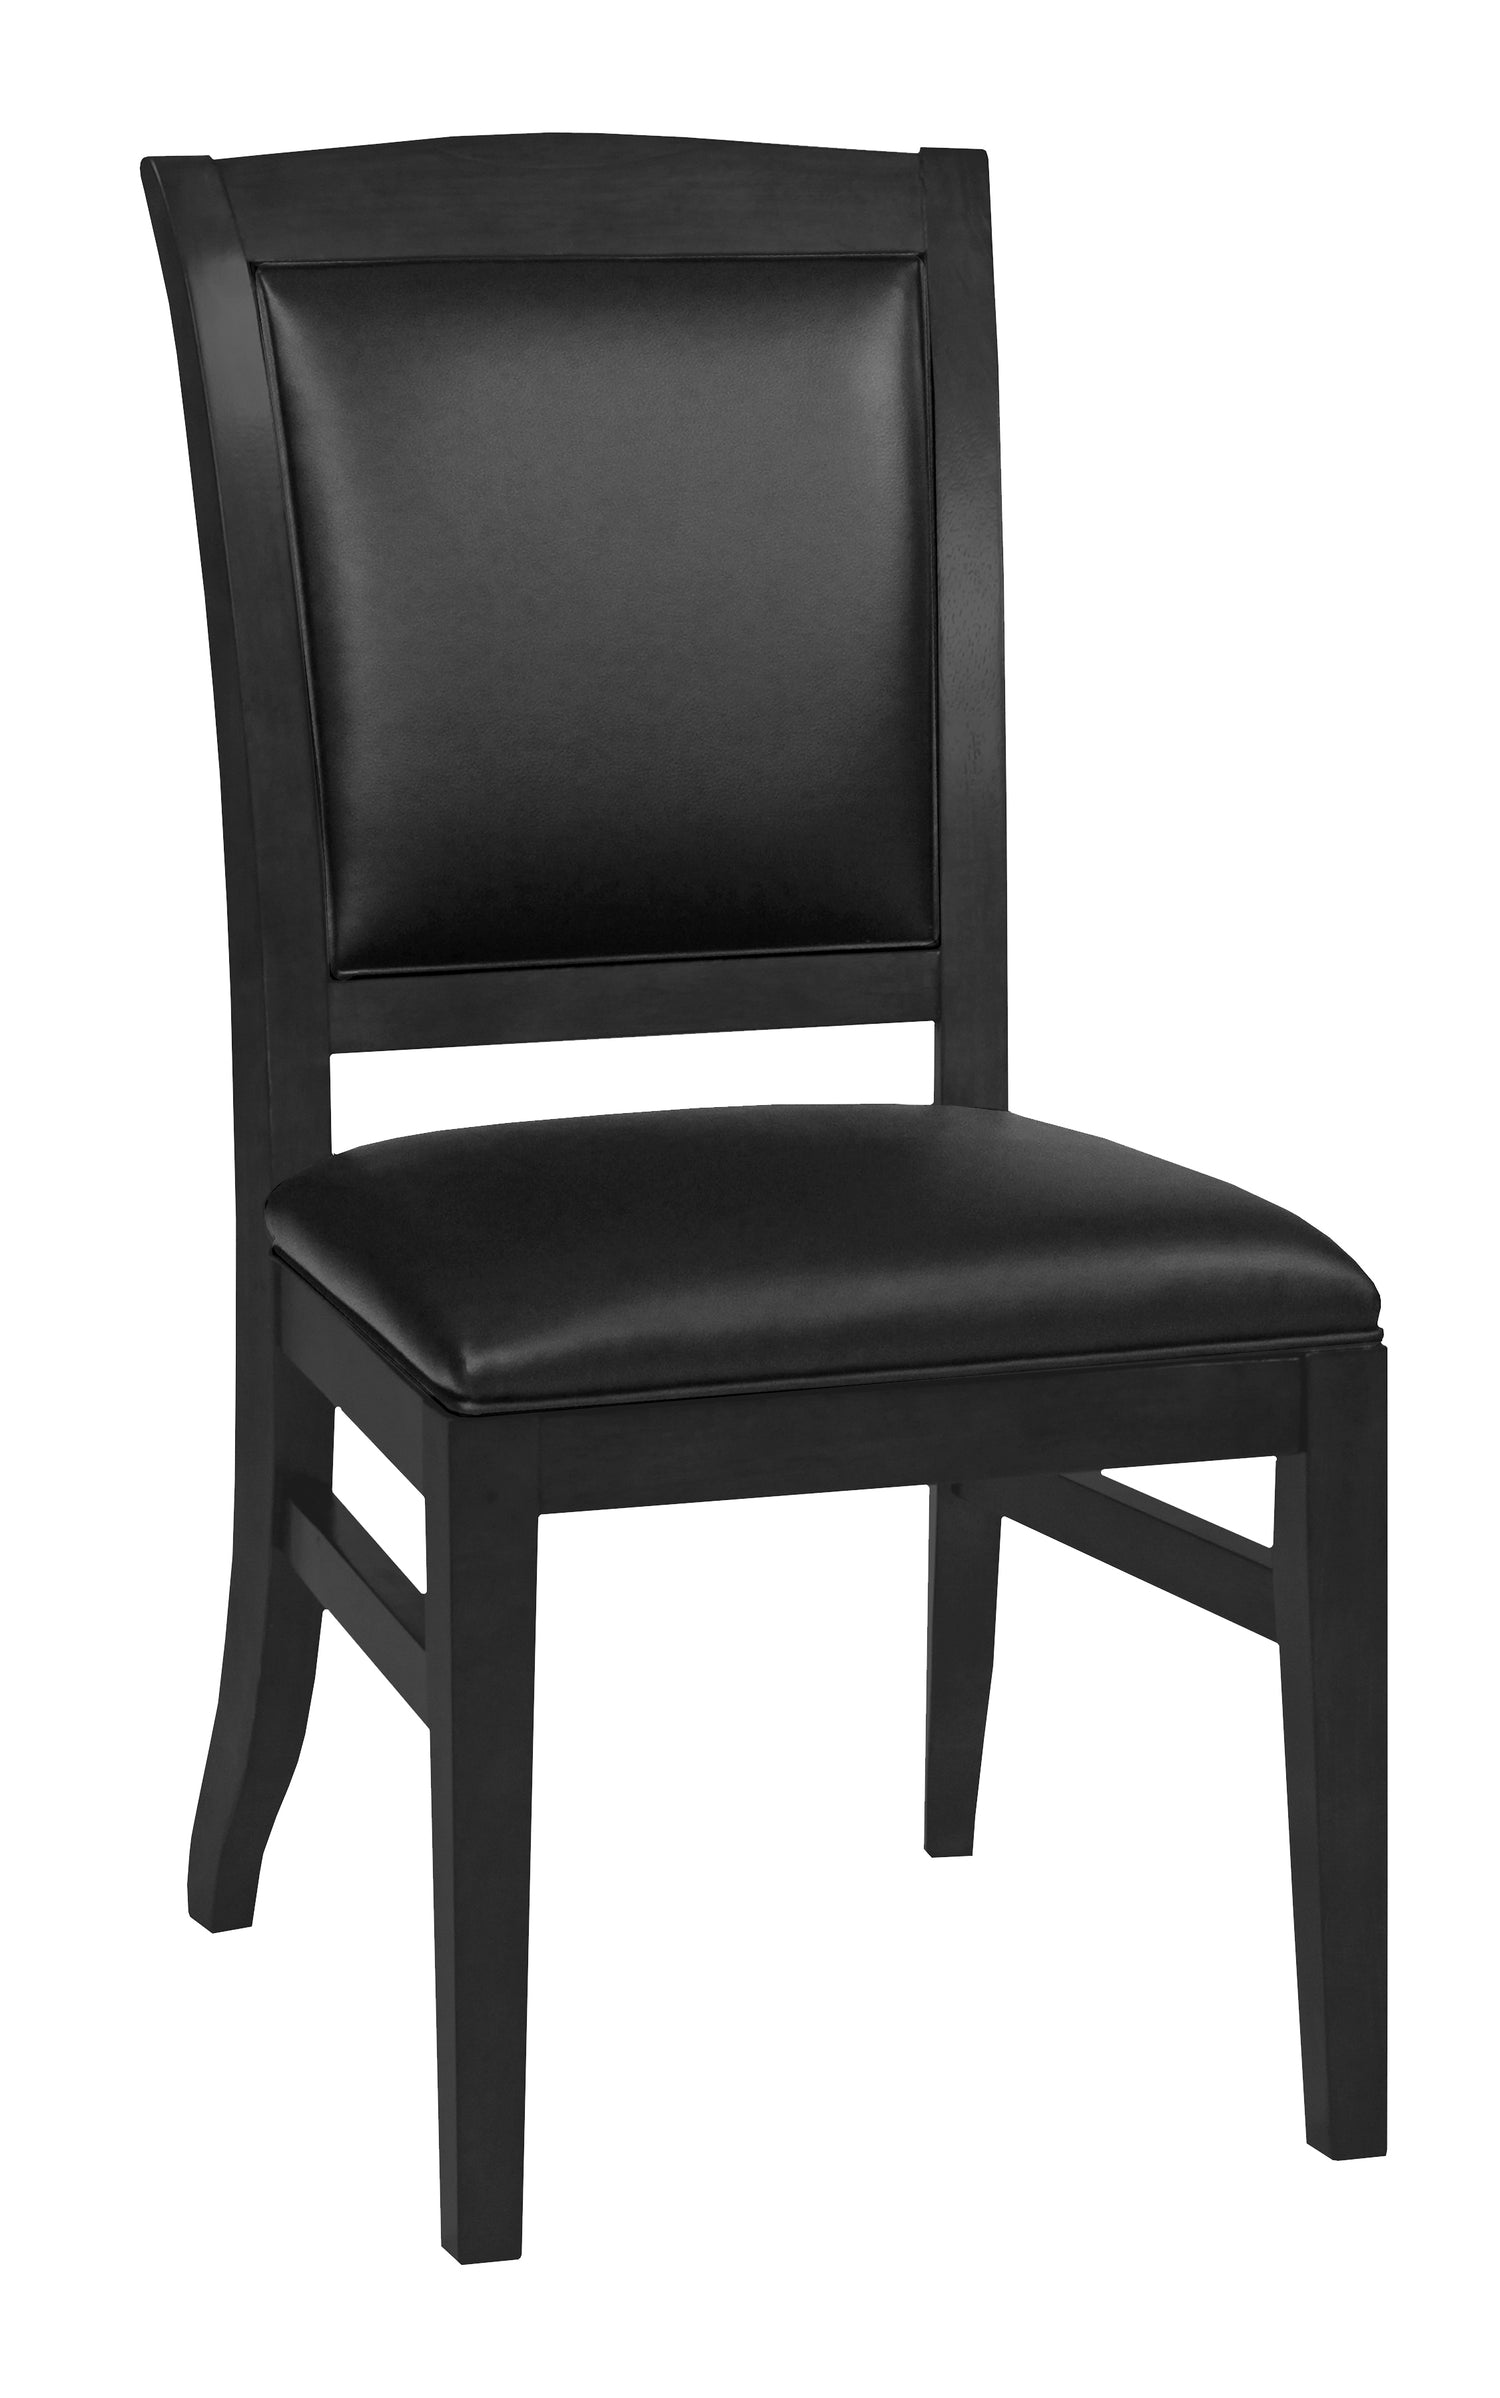 Legacy Billiards Heritage Dining Game Chair in Graphite Finish